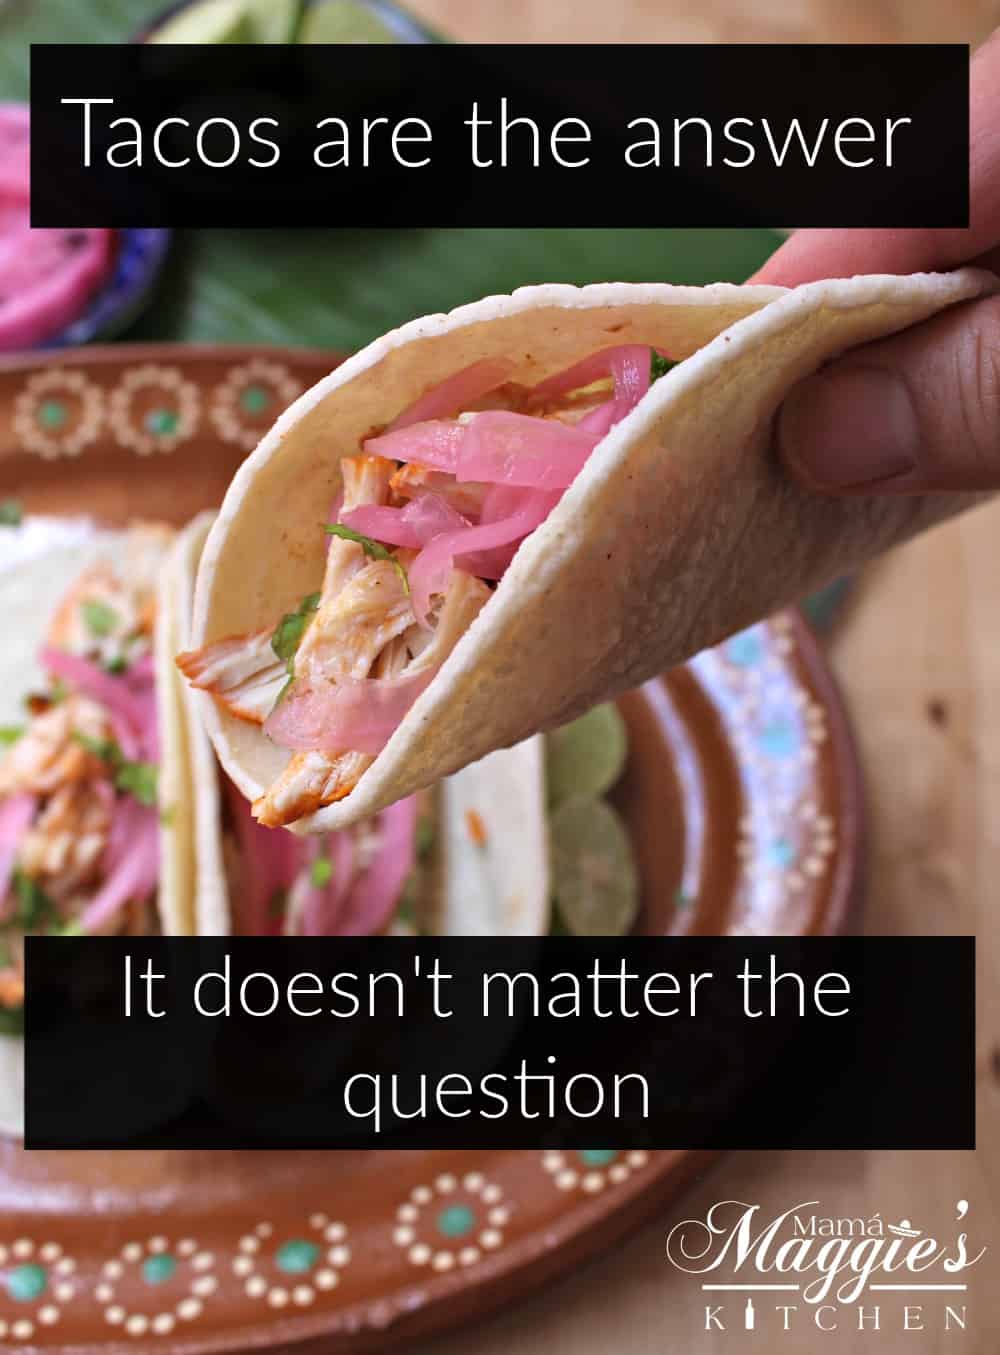 A hand holding a taco topped with pickled red onions.